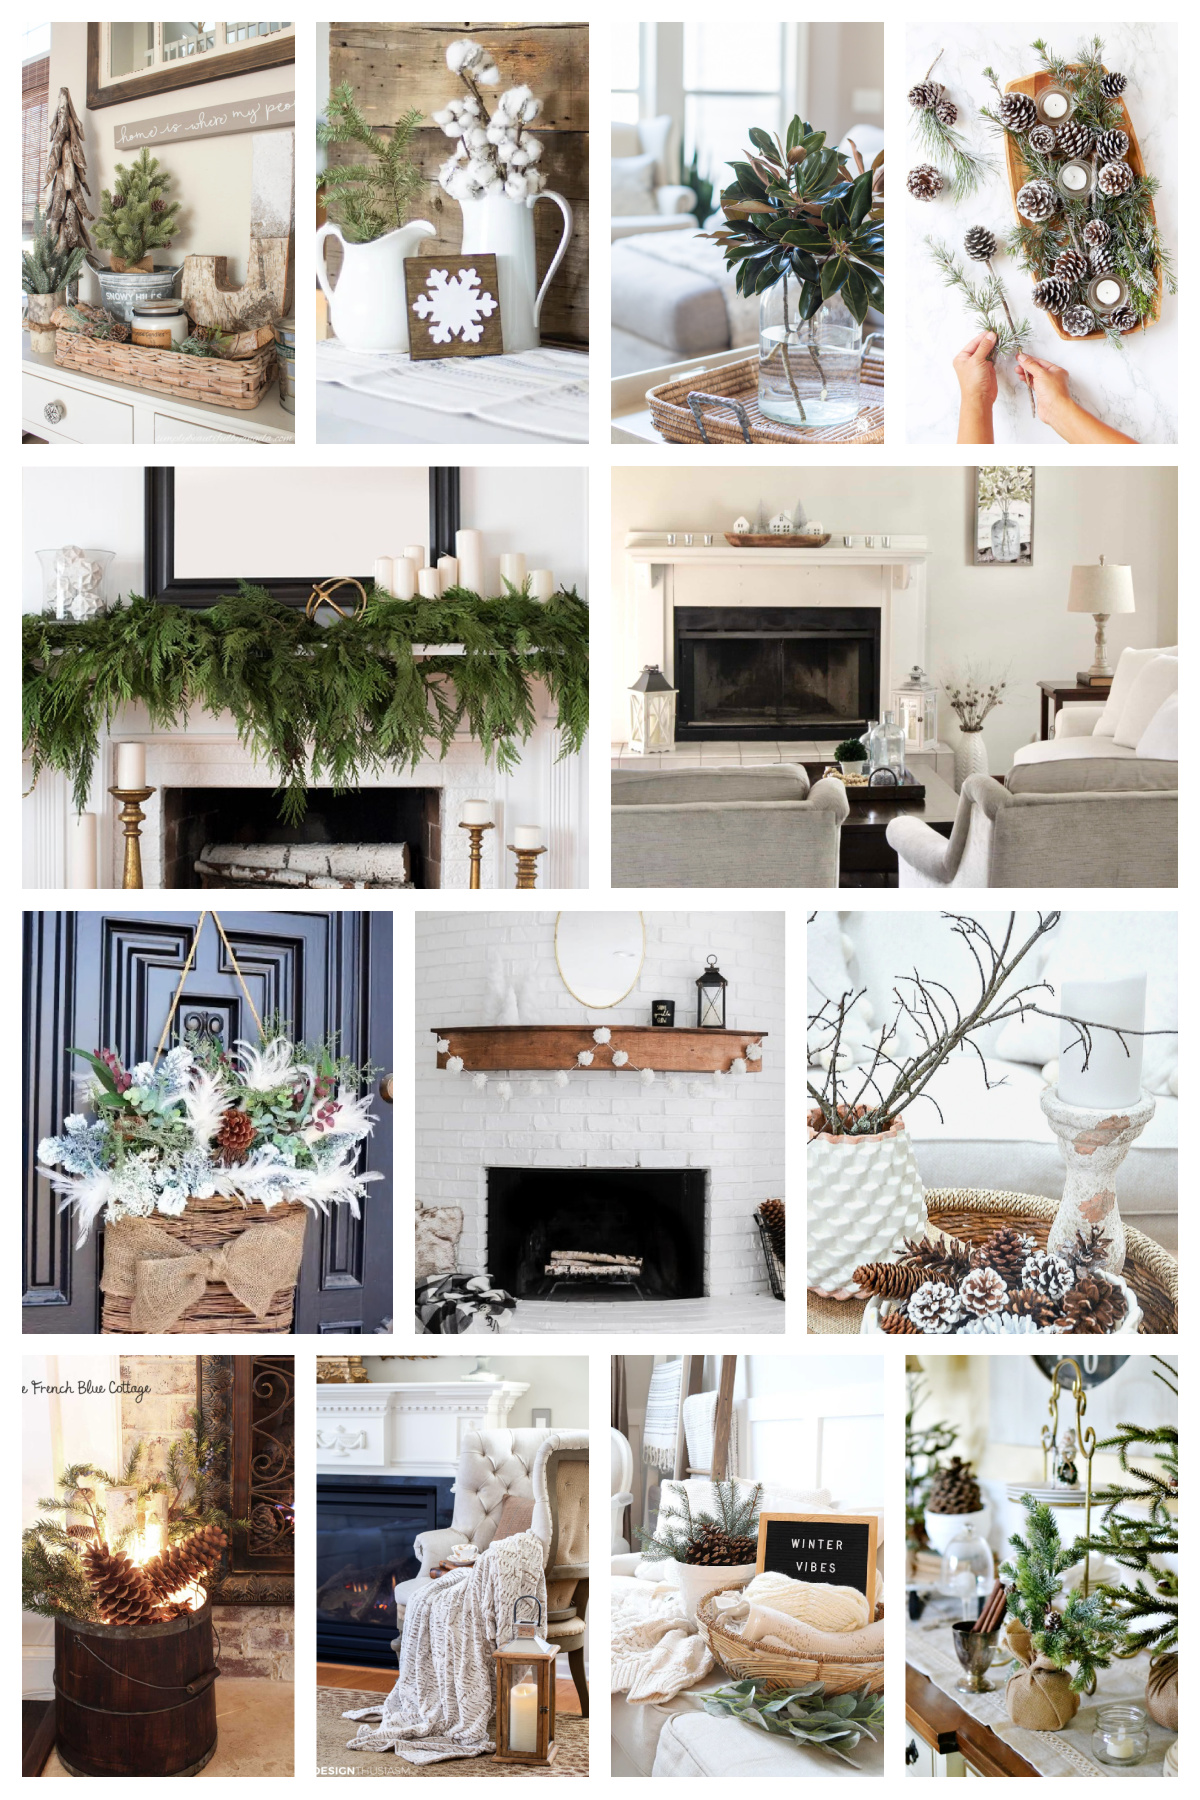 Decor Must Haves to Turn Your Space into a Cozy Winter Lodge